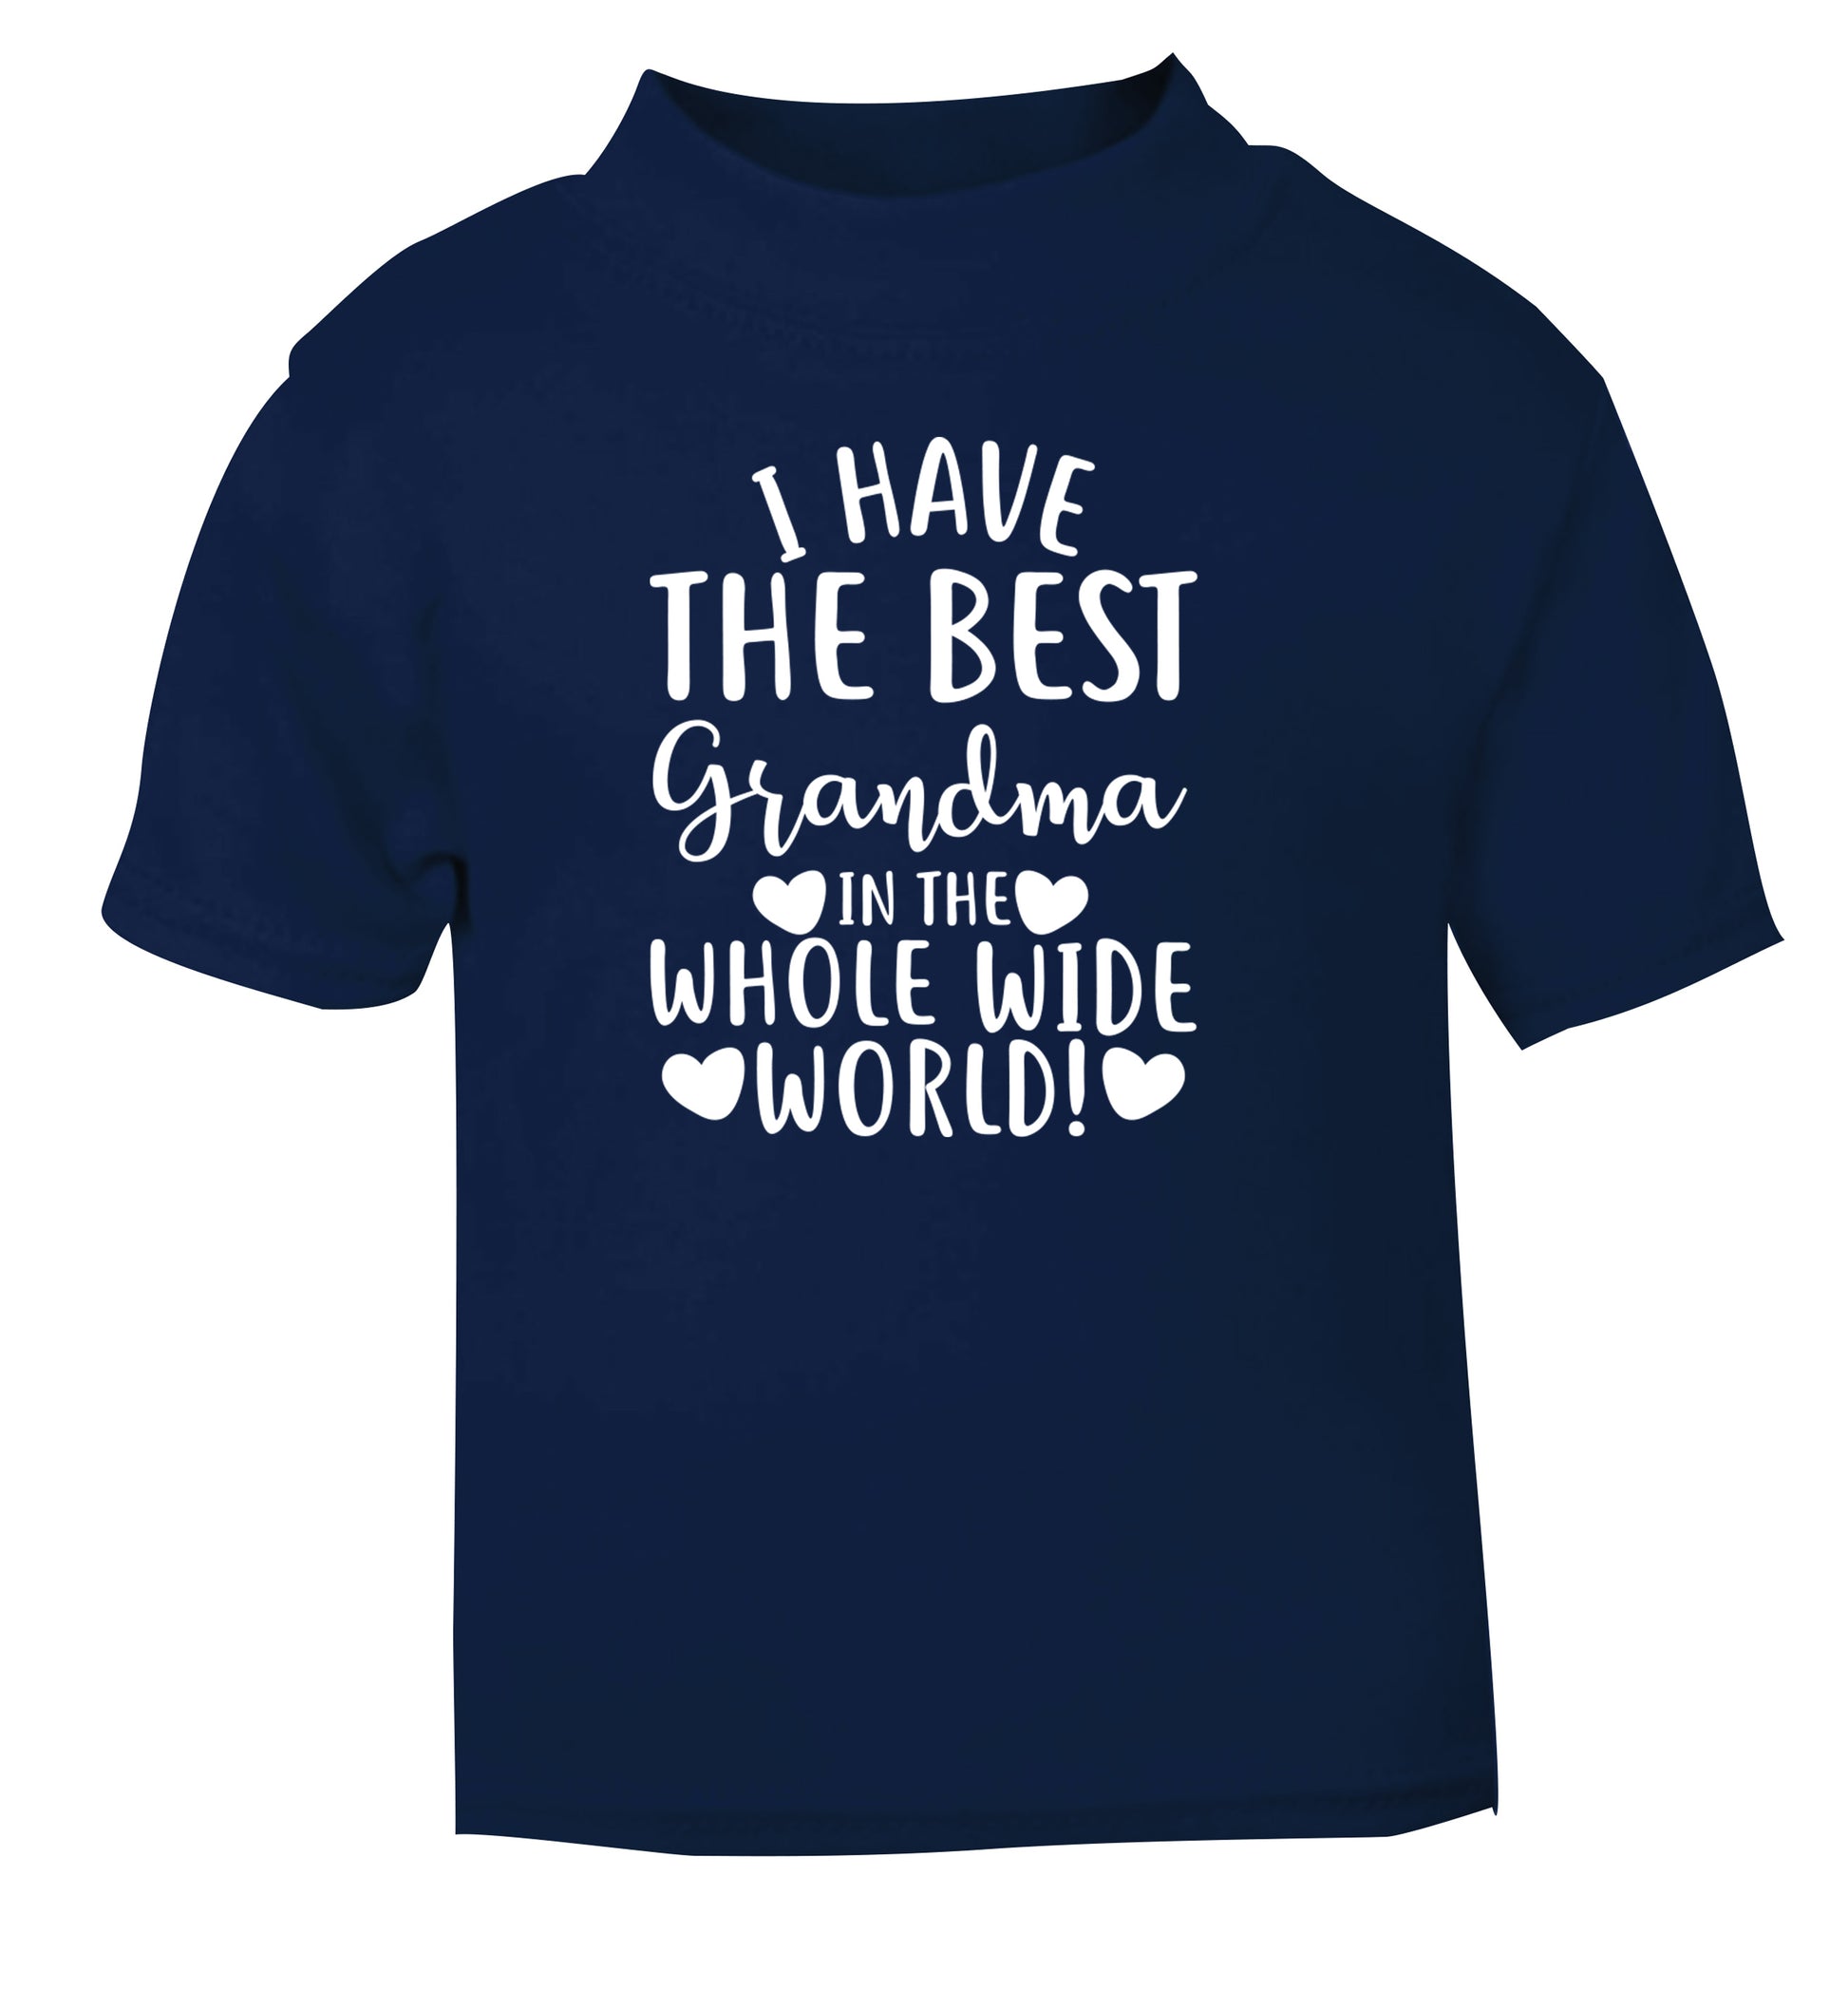 I have the best grandma in the whole wide world! navy Baby Toddler Tshirt 2 Years